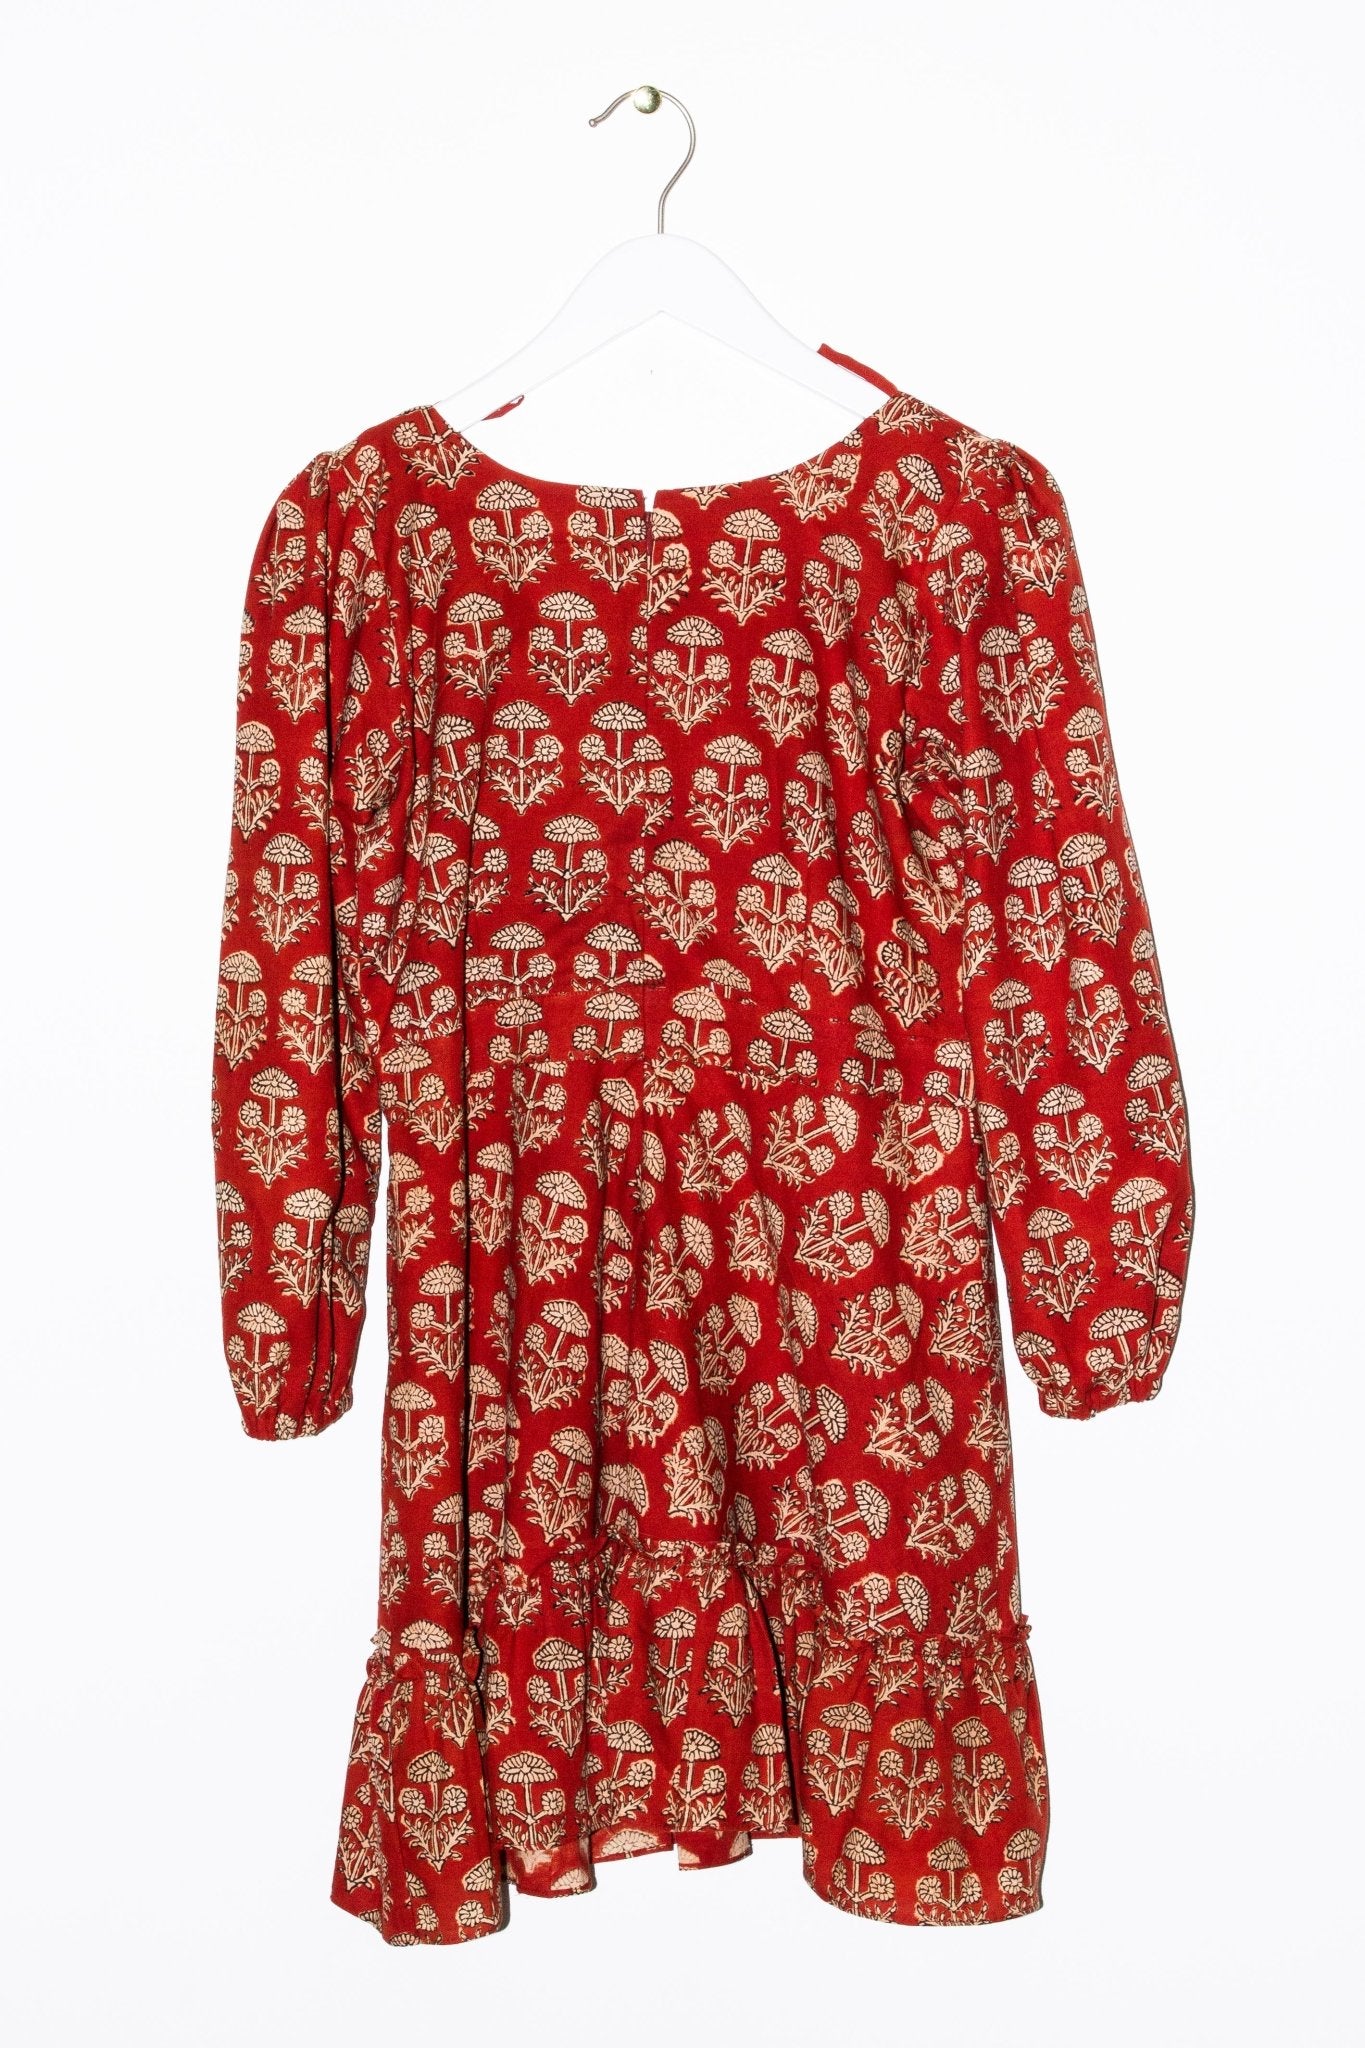 Berry Bright Floral Dress - CHYATEE